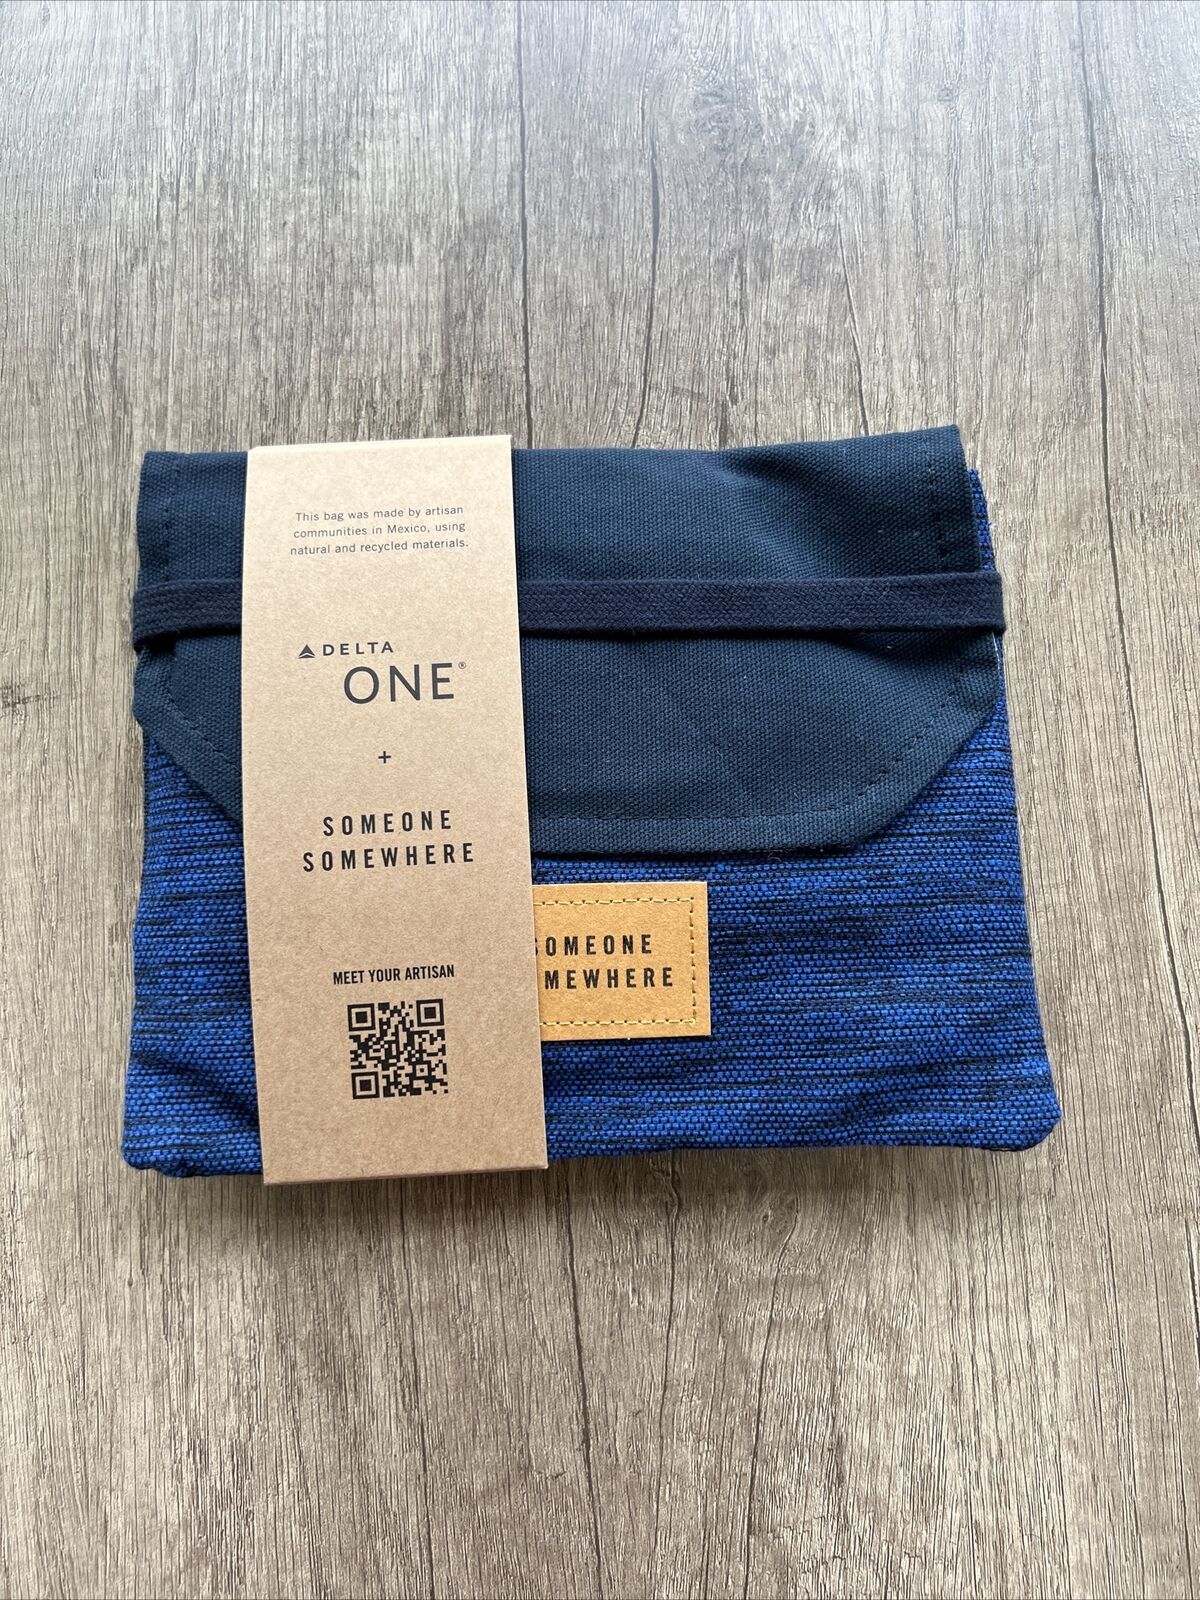 Delta Air Lines - Delta One Amenity Kit (Blue) - Someone Somewhere